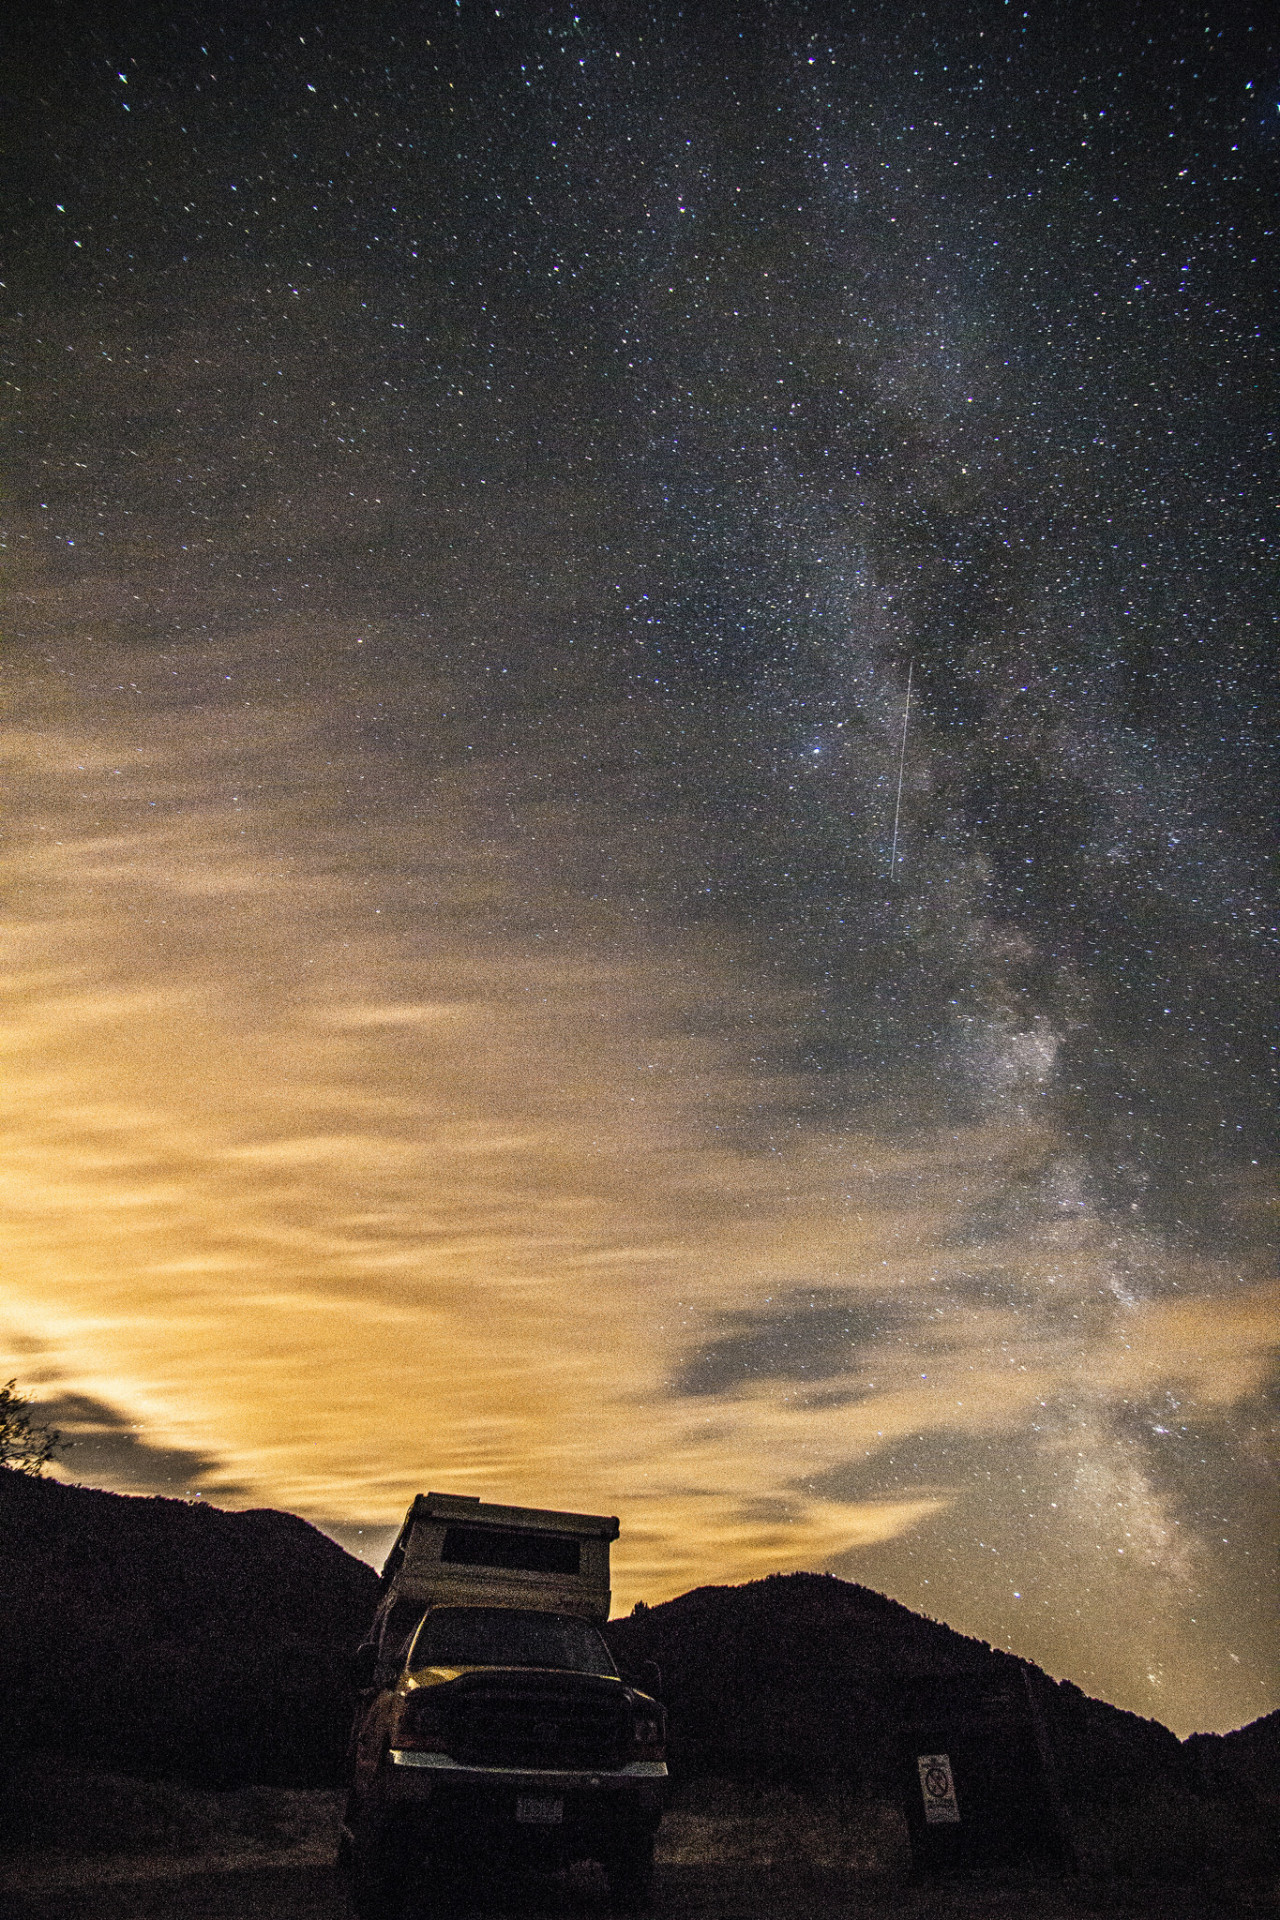 tulipnight:  Clouds with Milky Way by Five Aliveon Flickr. 